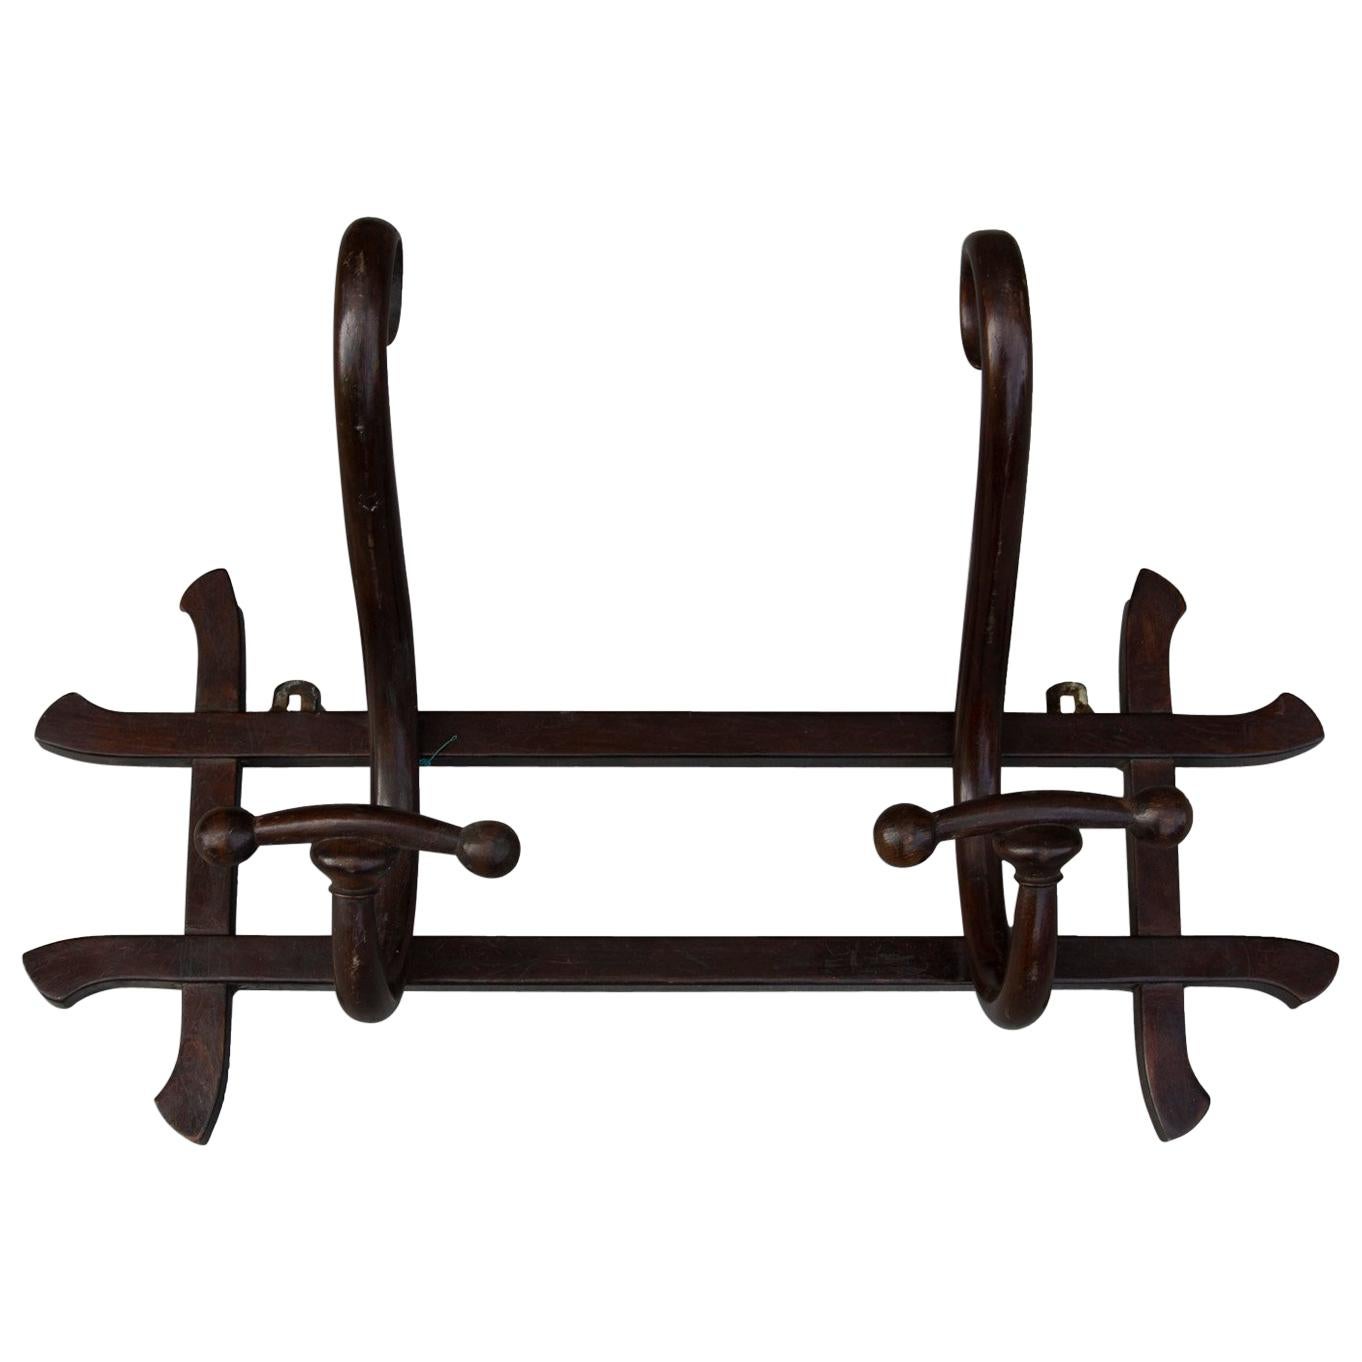 Vienna Secession Bentwood Coat Rack by Thonet, 1900